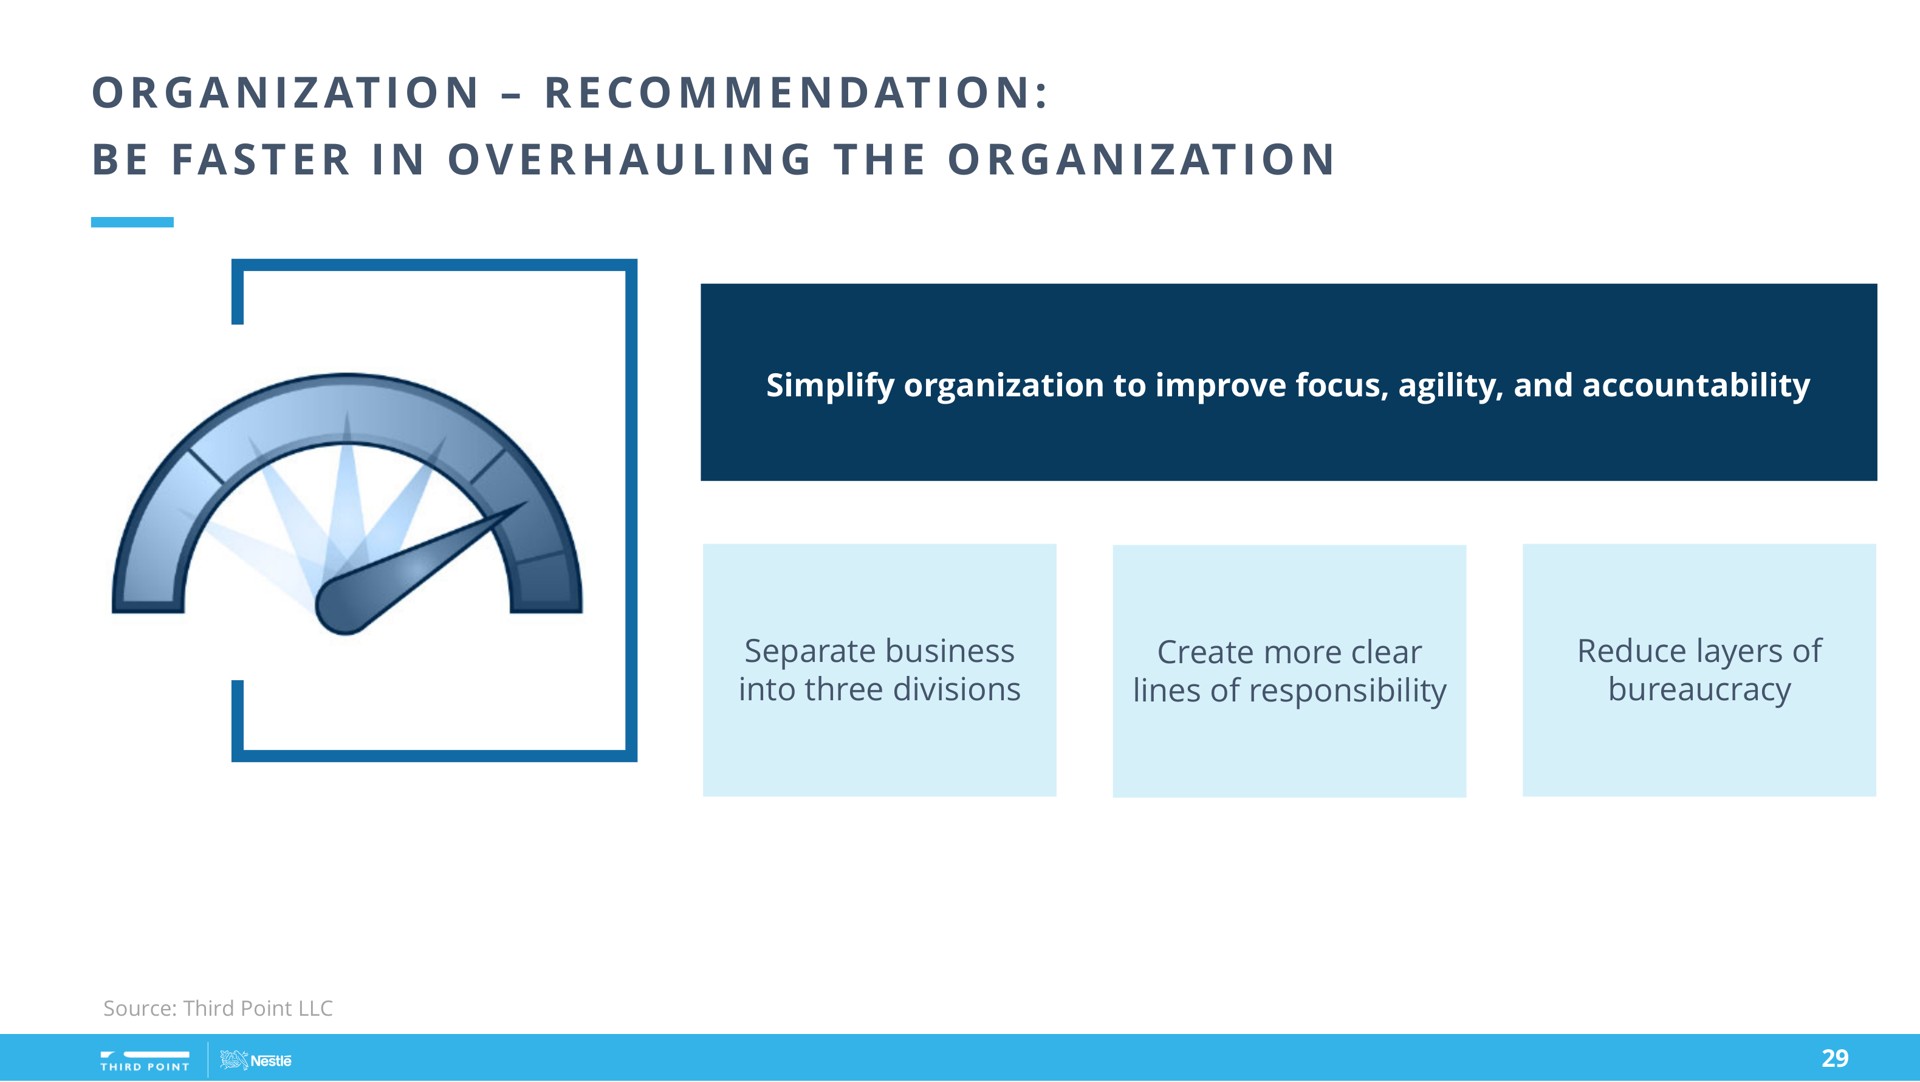 a i at i at i i a i a i at i organization recommendation be faster in overhauling the organization | Third Point Management